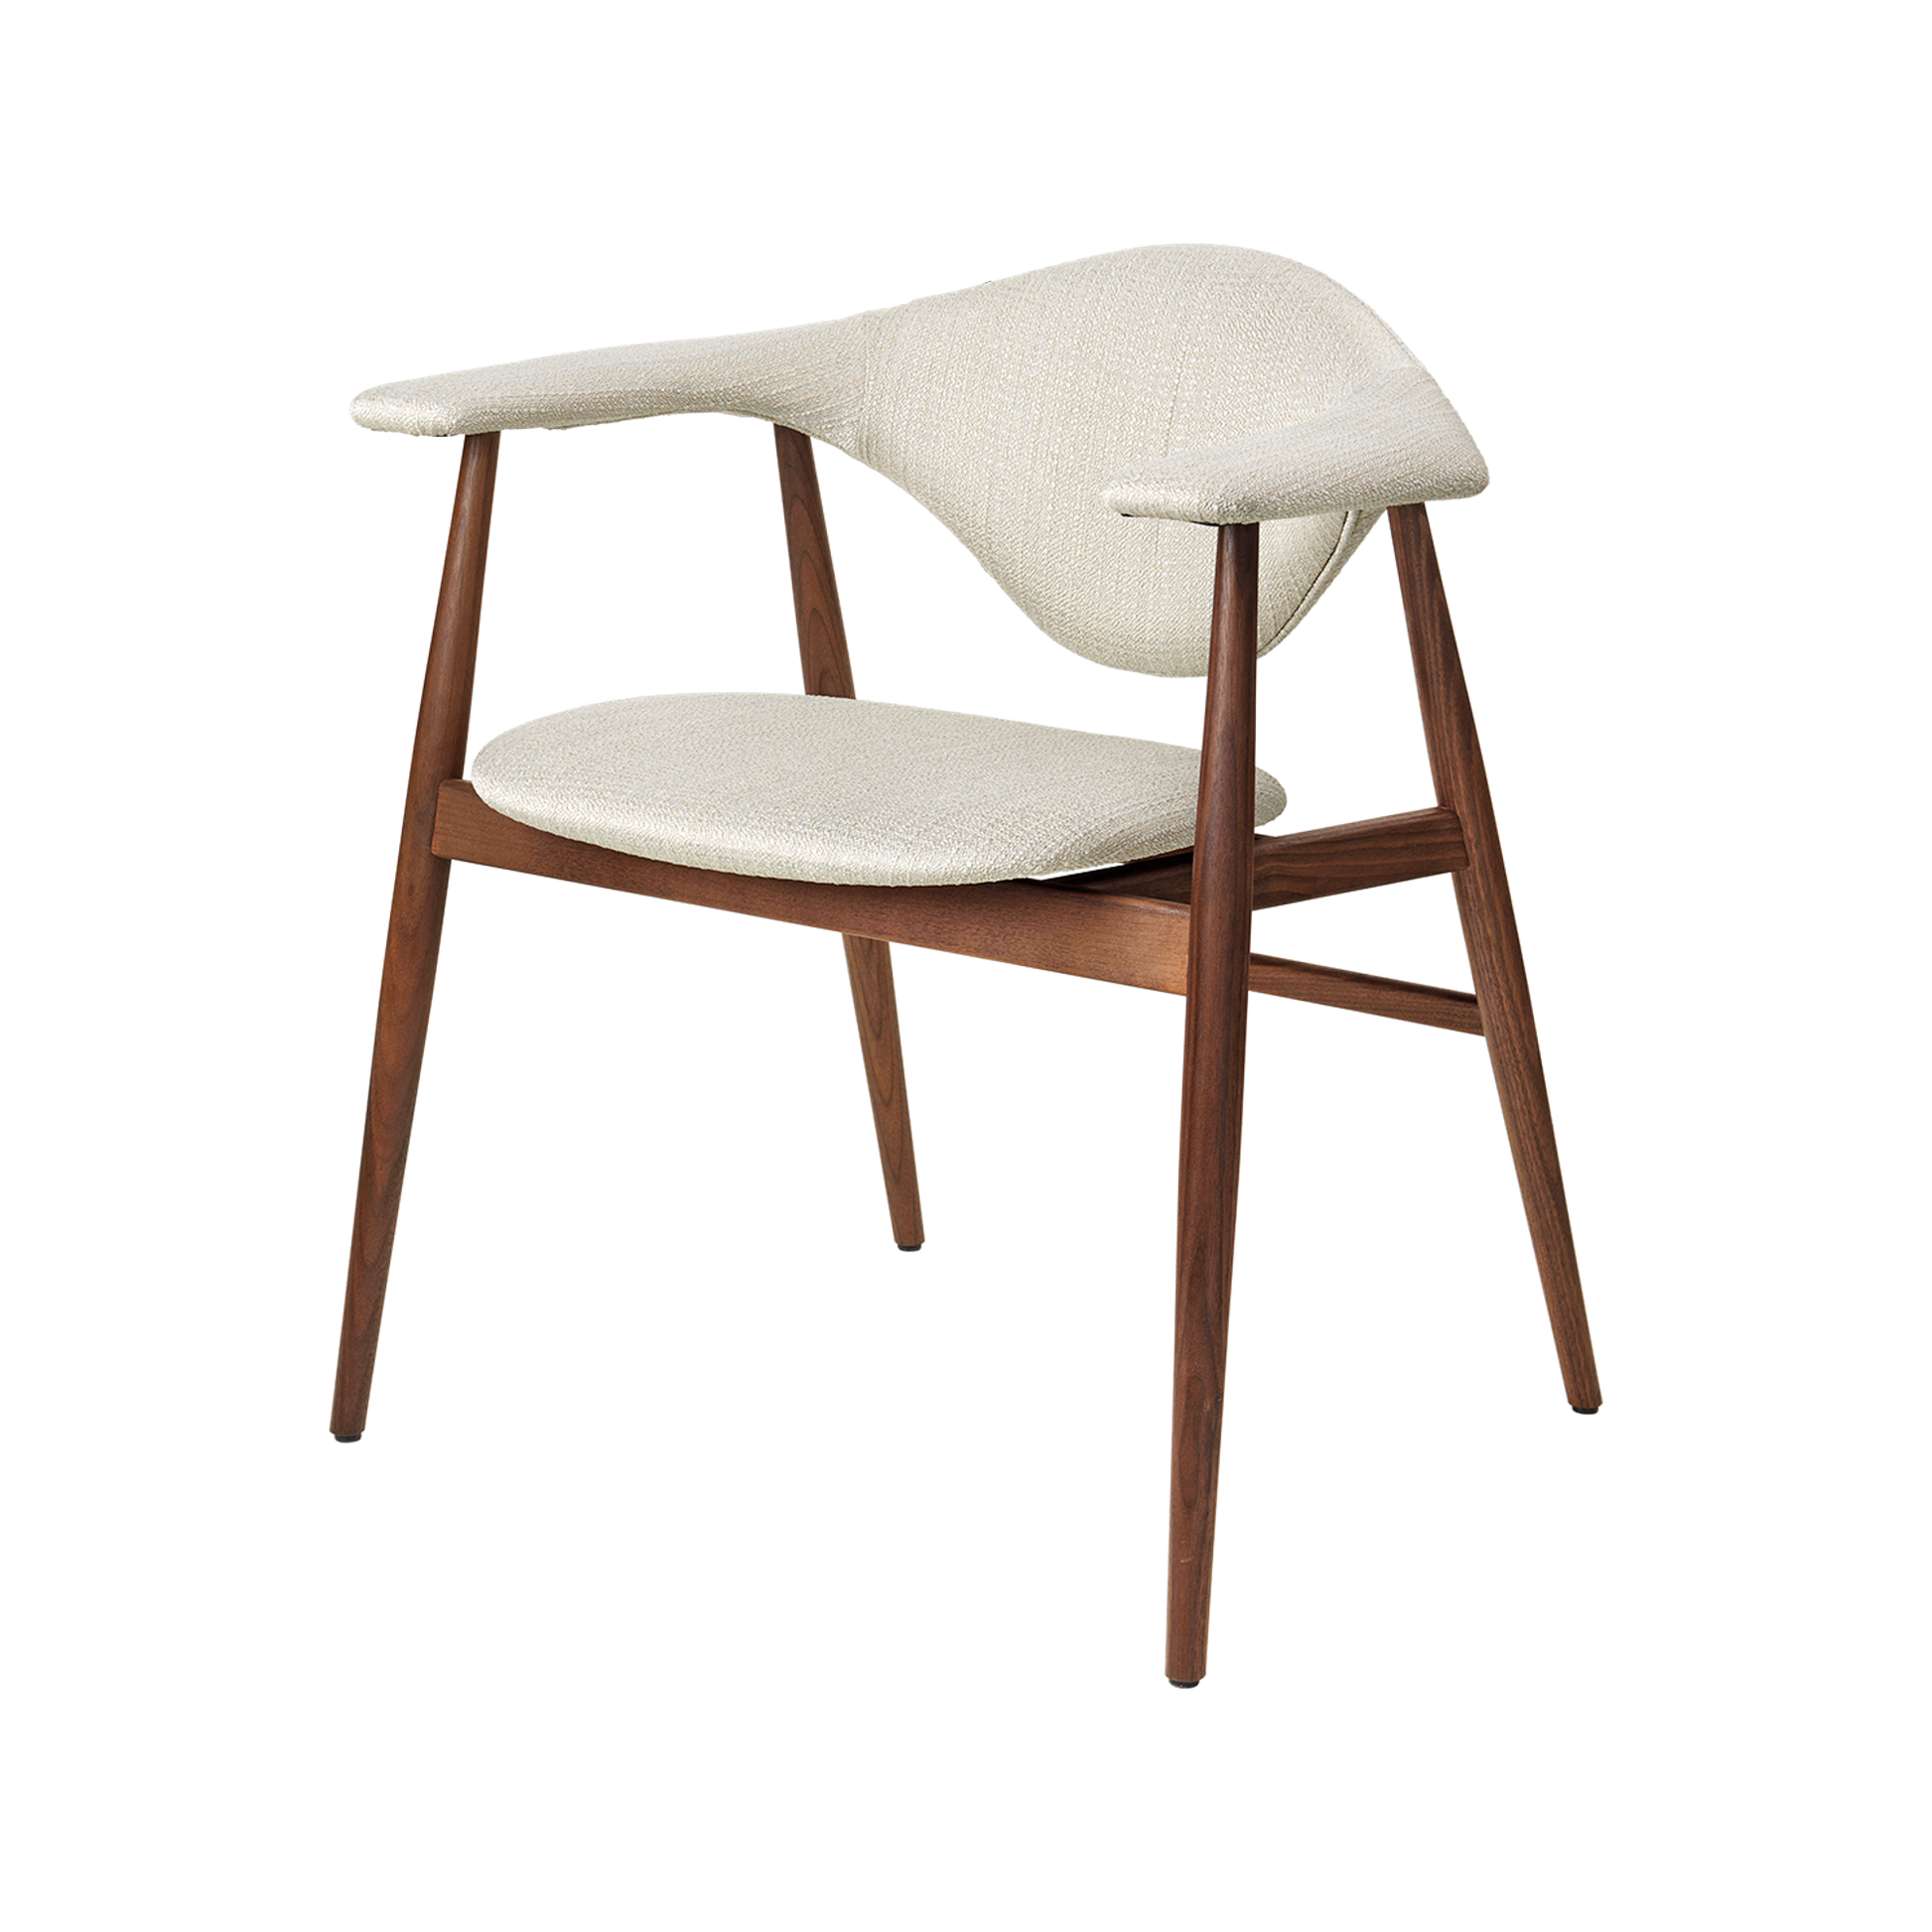 Masculo Dining Chair Upholstered by GUBI #Eero Special FR 106 With Legs In Walnut